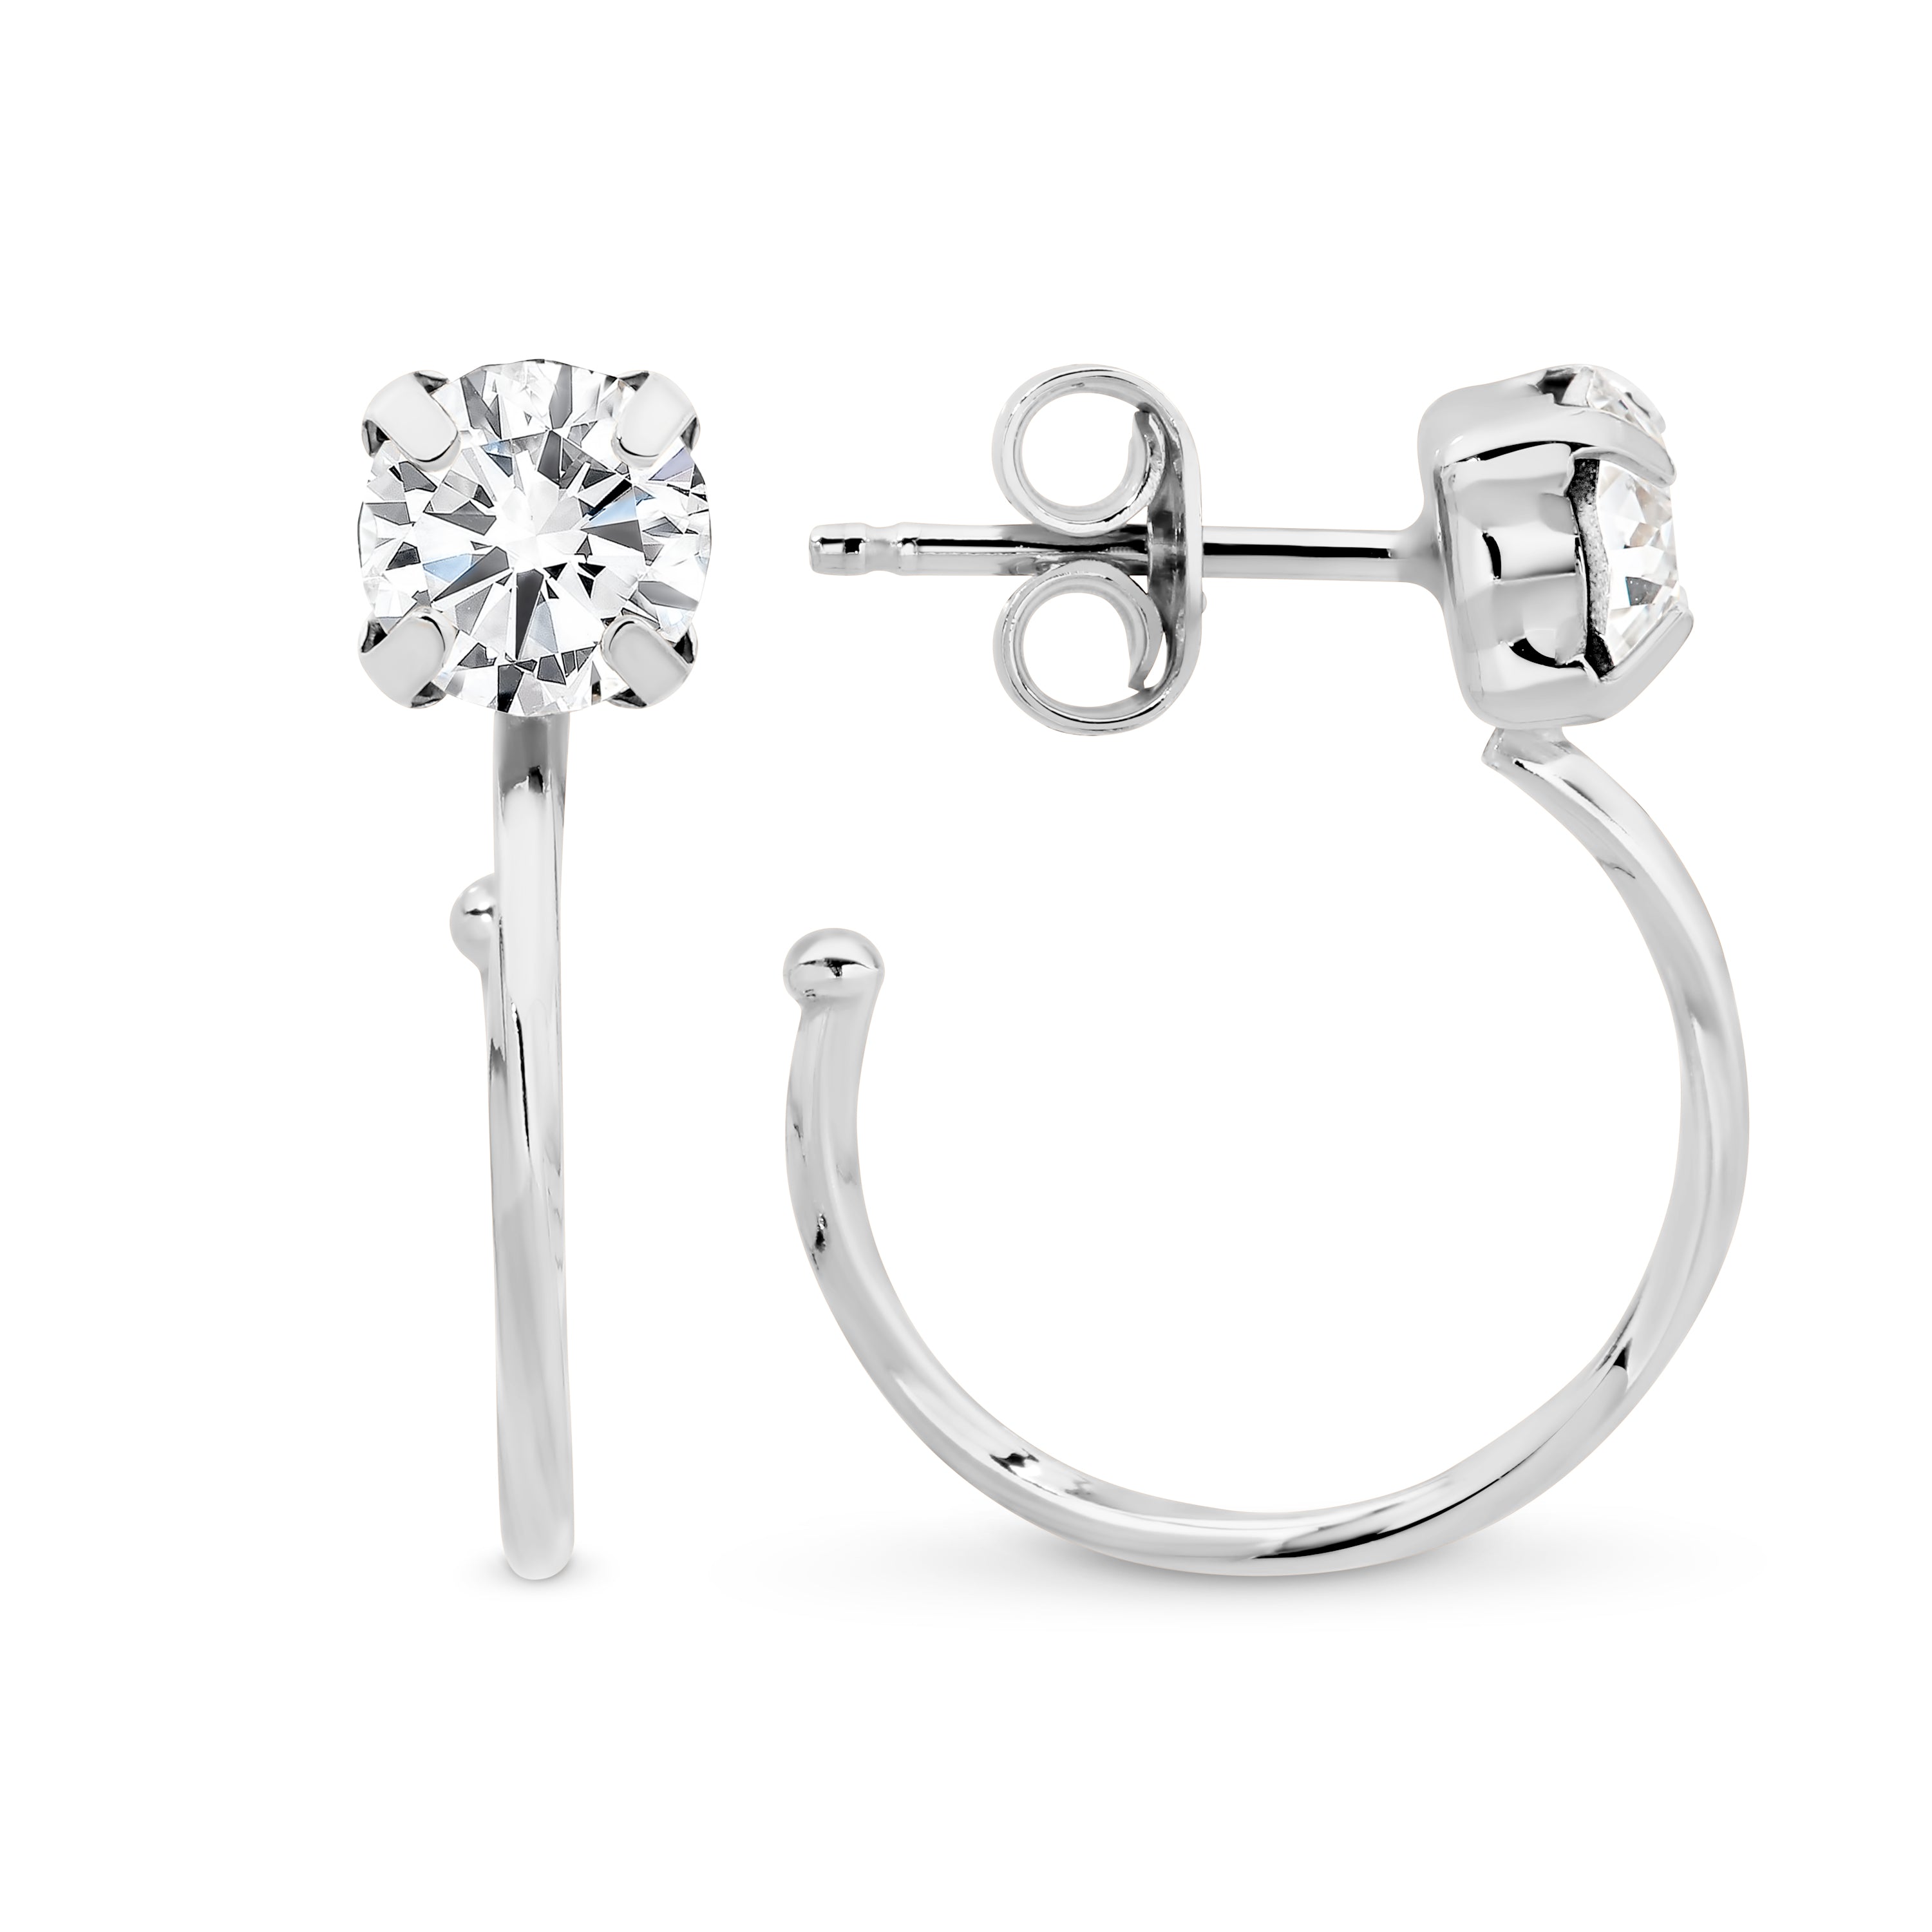 Sterling Silver Stud Hoop Earrings by Davvero with Crystals from Swarovski®